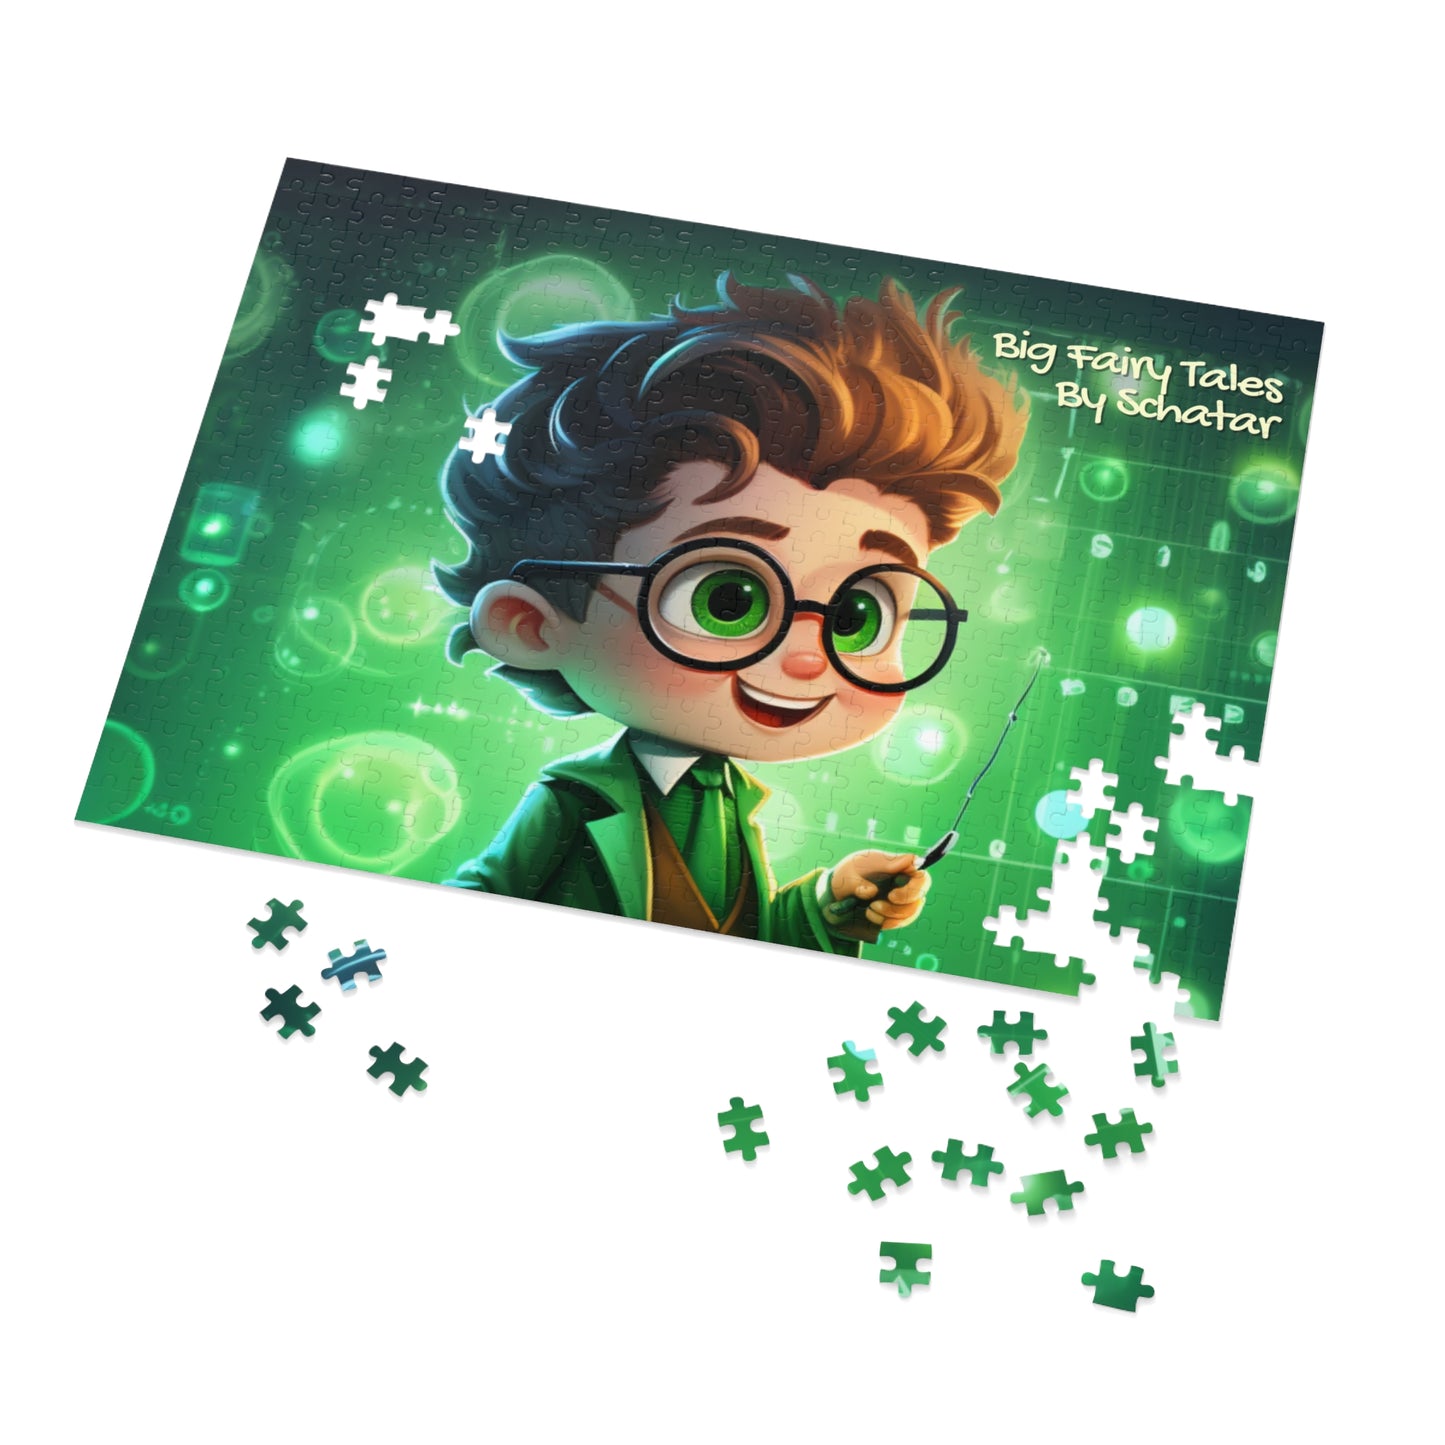 Professor - Big Little Professionals Puzzle 11 From Big Fairy Tales By Schatar